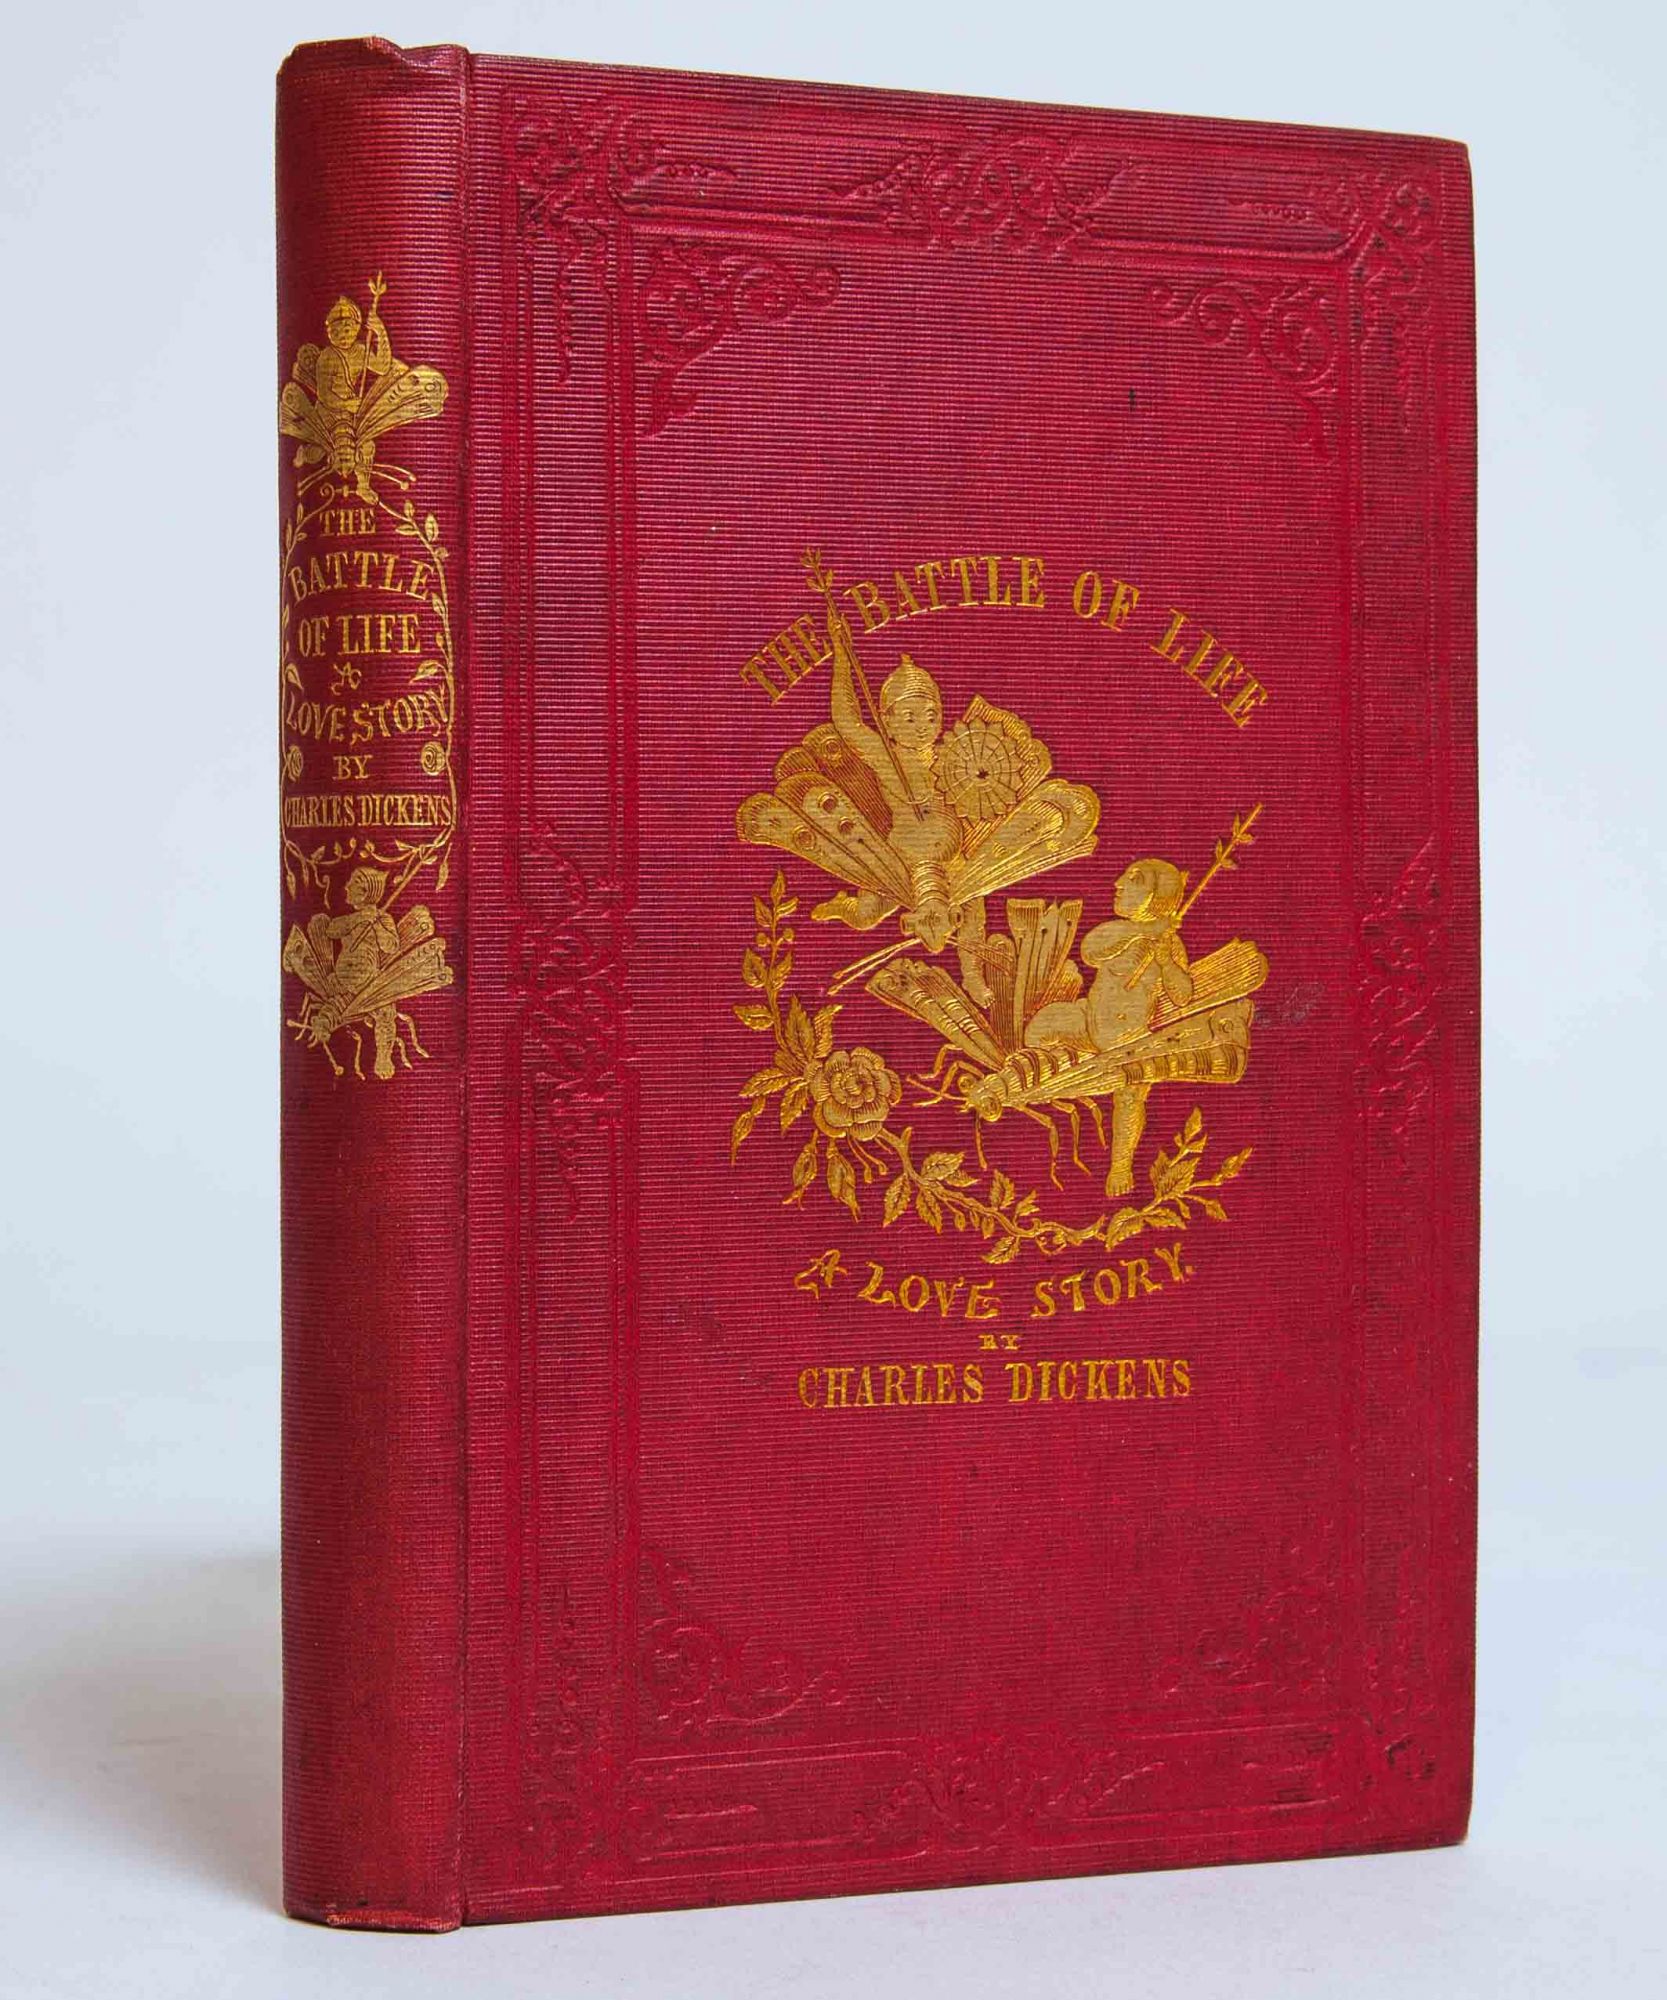 (Item #1771) The Battle of Life. Charles Dickens.